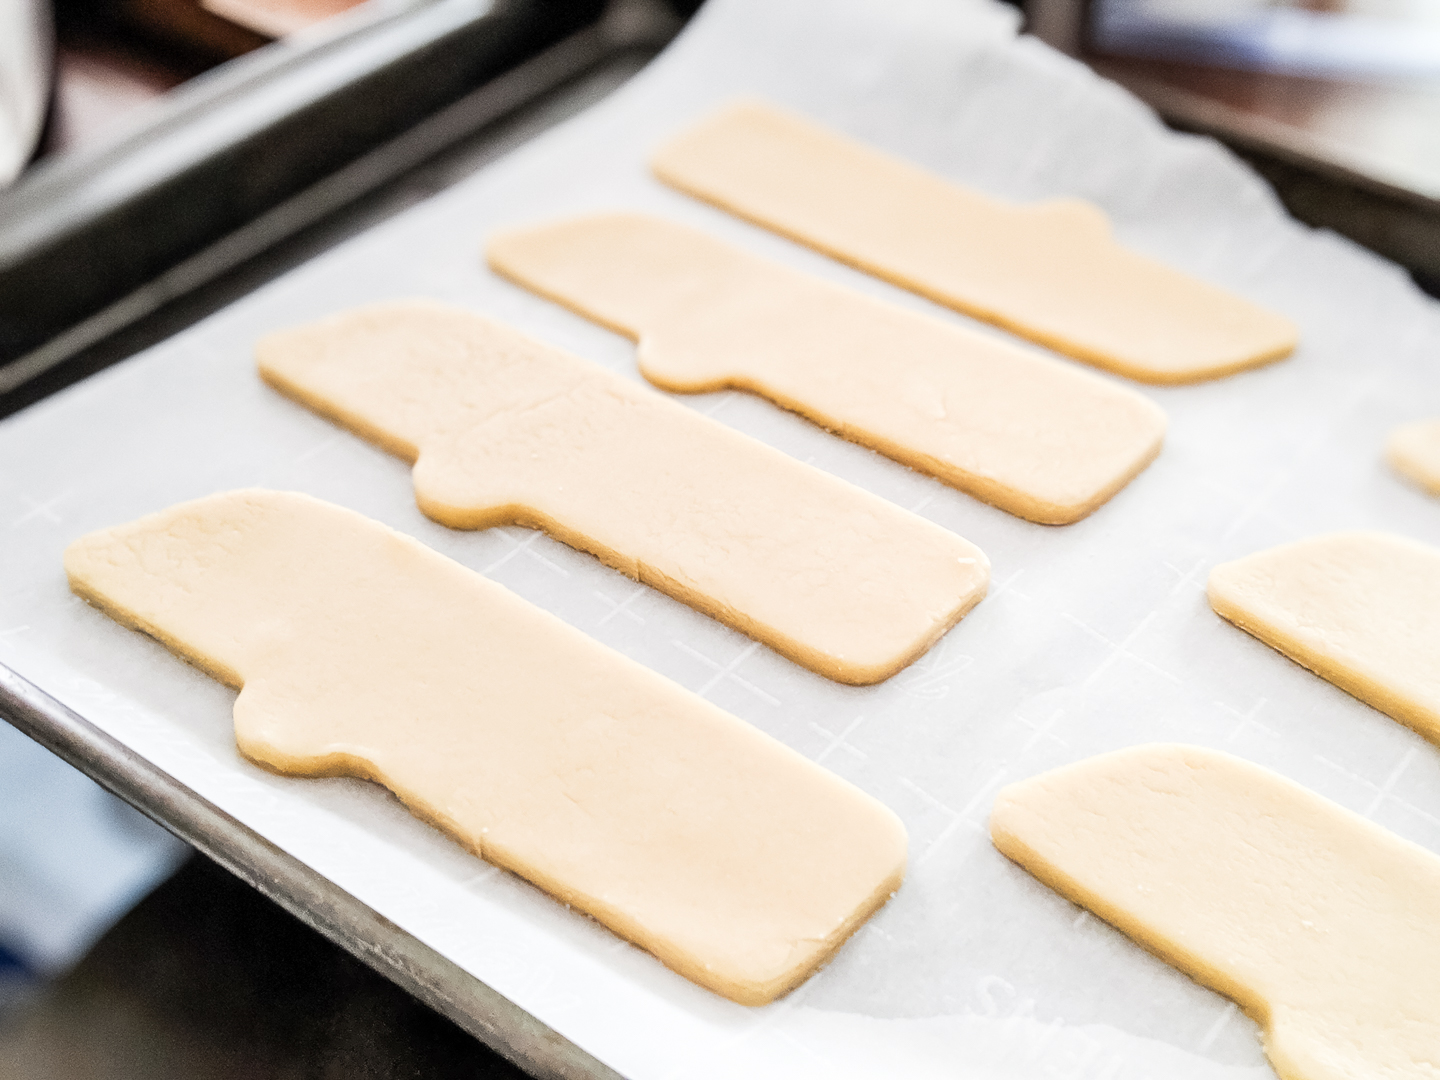 cut out each cookie and place on cookie sheet